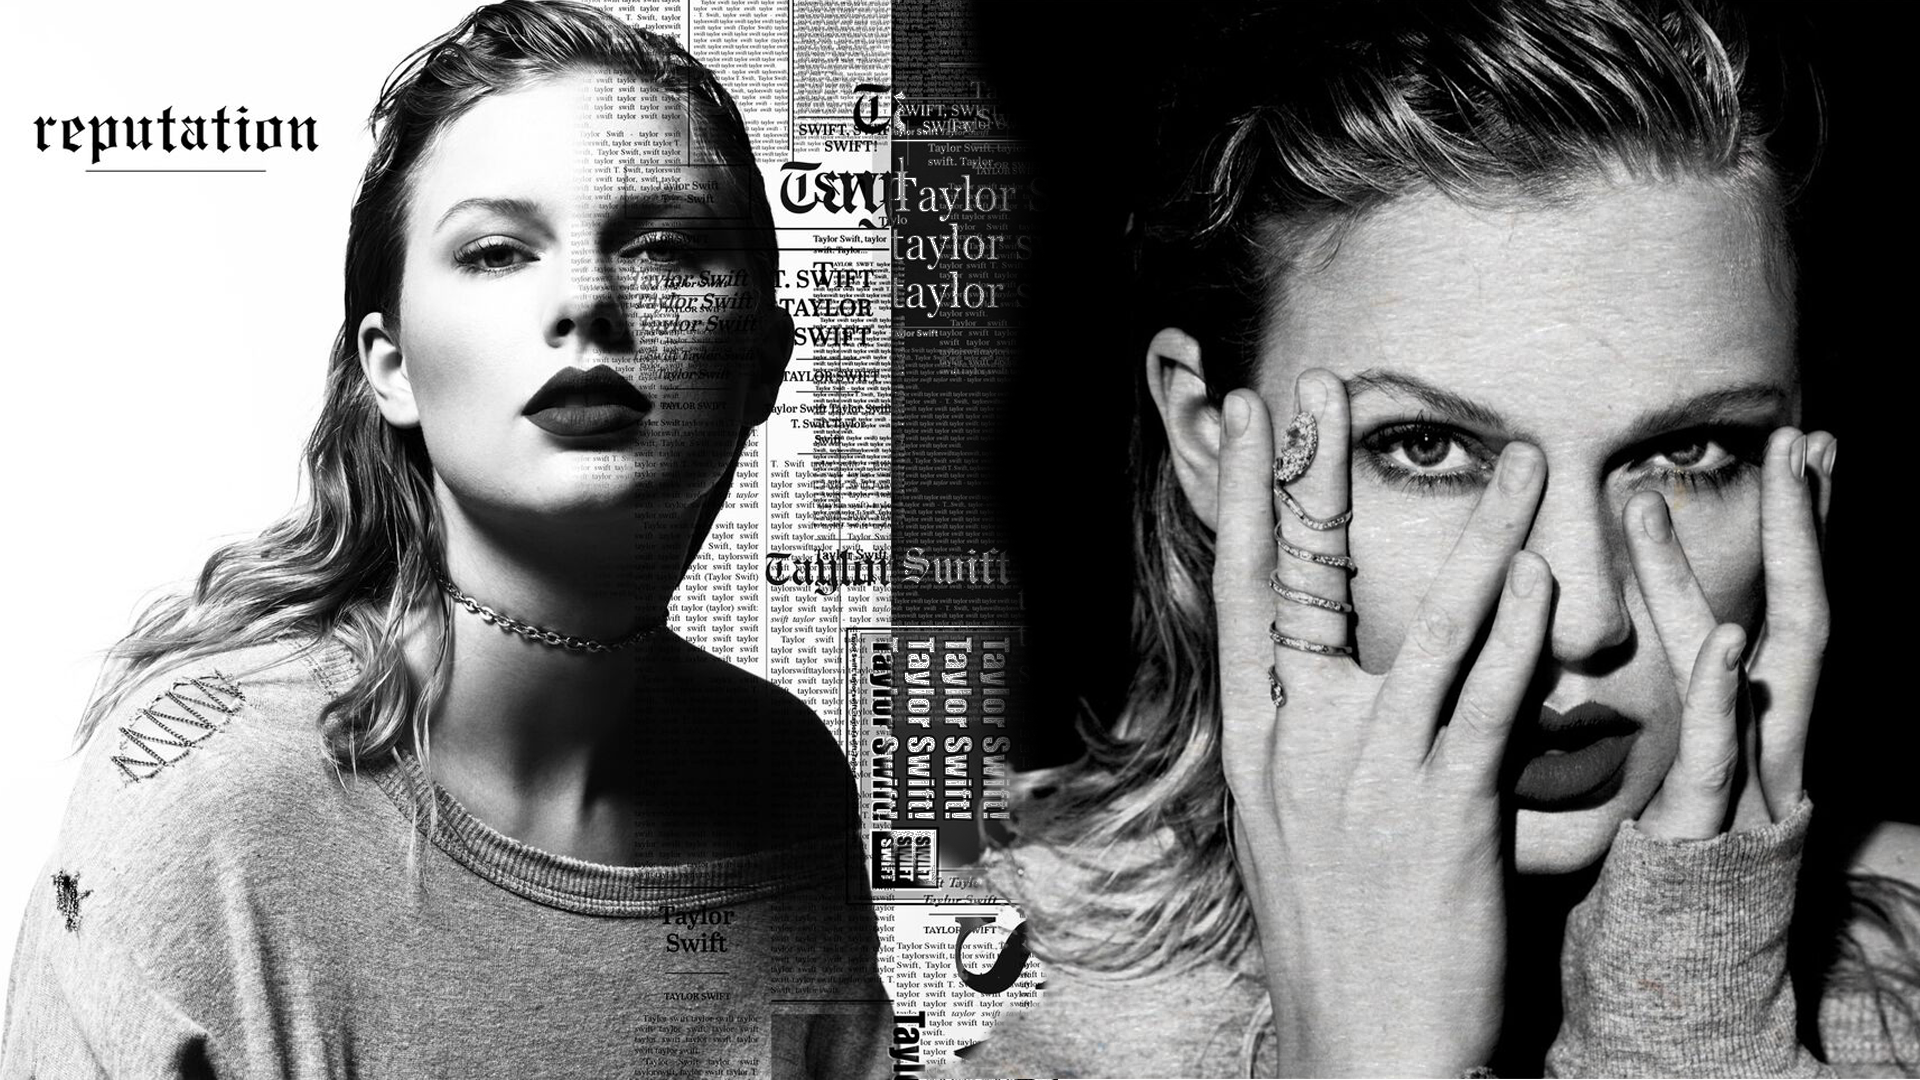 How reputation Helped Taylor Swift Change Her Narrative